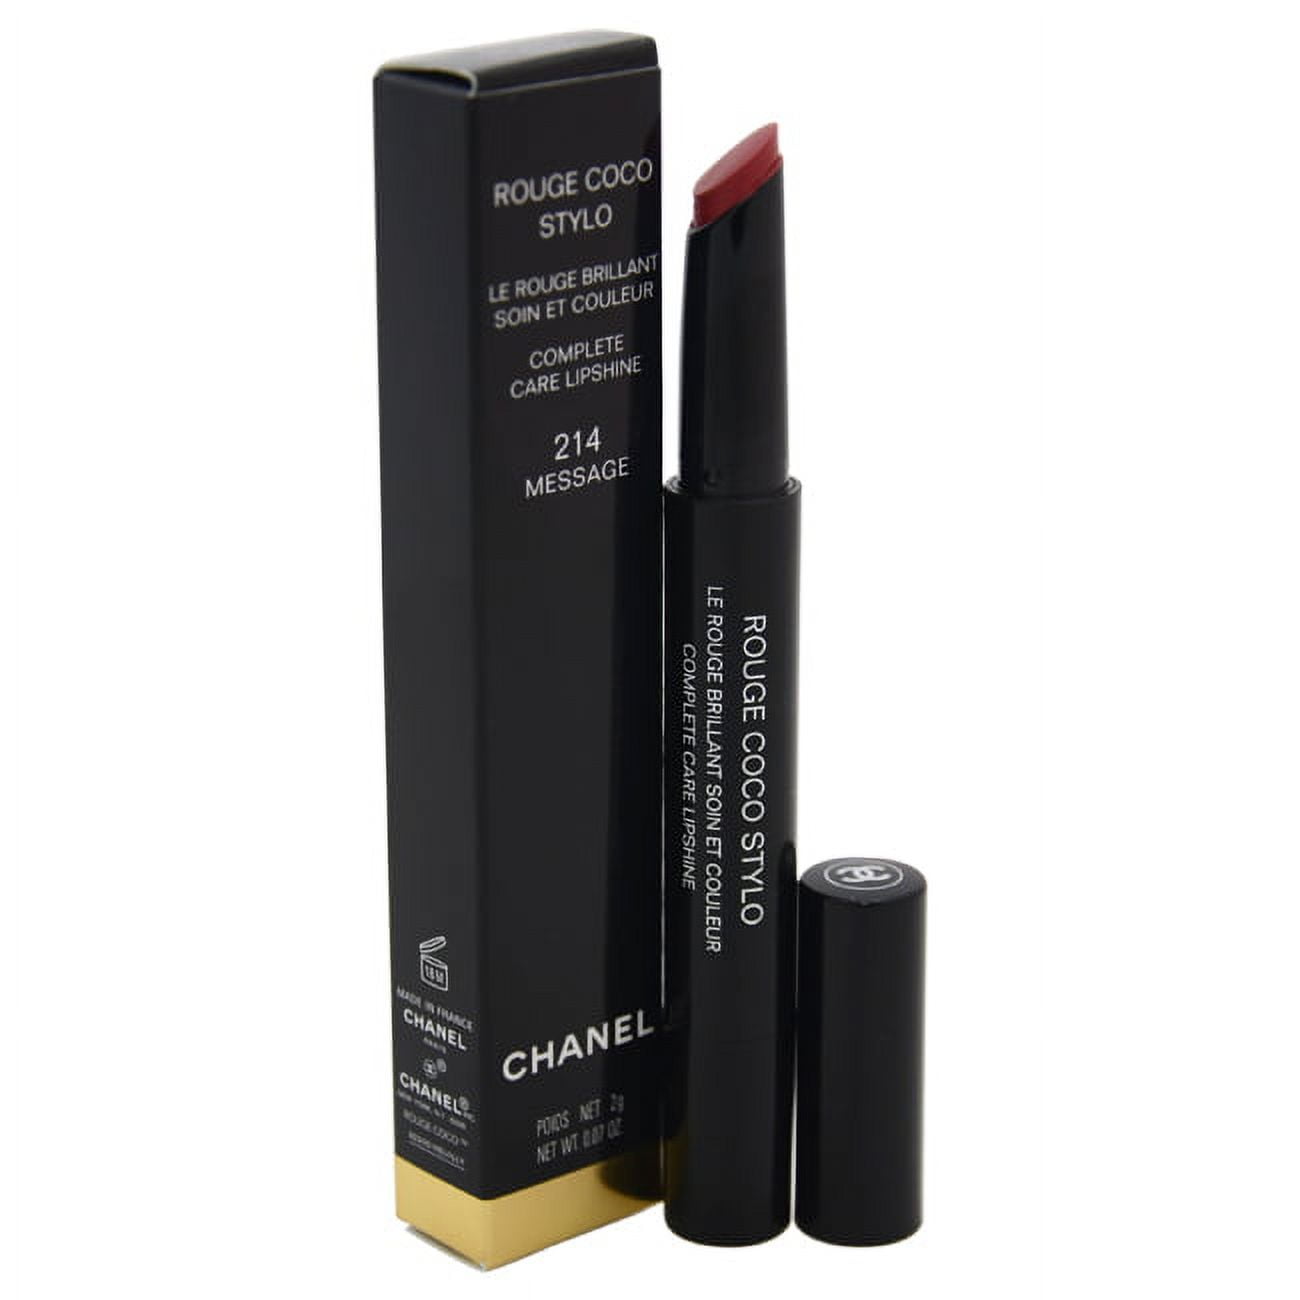 CHANEL LIPSTICK COMPARISON & SWATCHES: Rouge Allure, Rouge Coco & Rouge Coco  Stylo